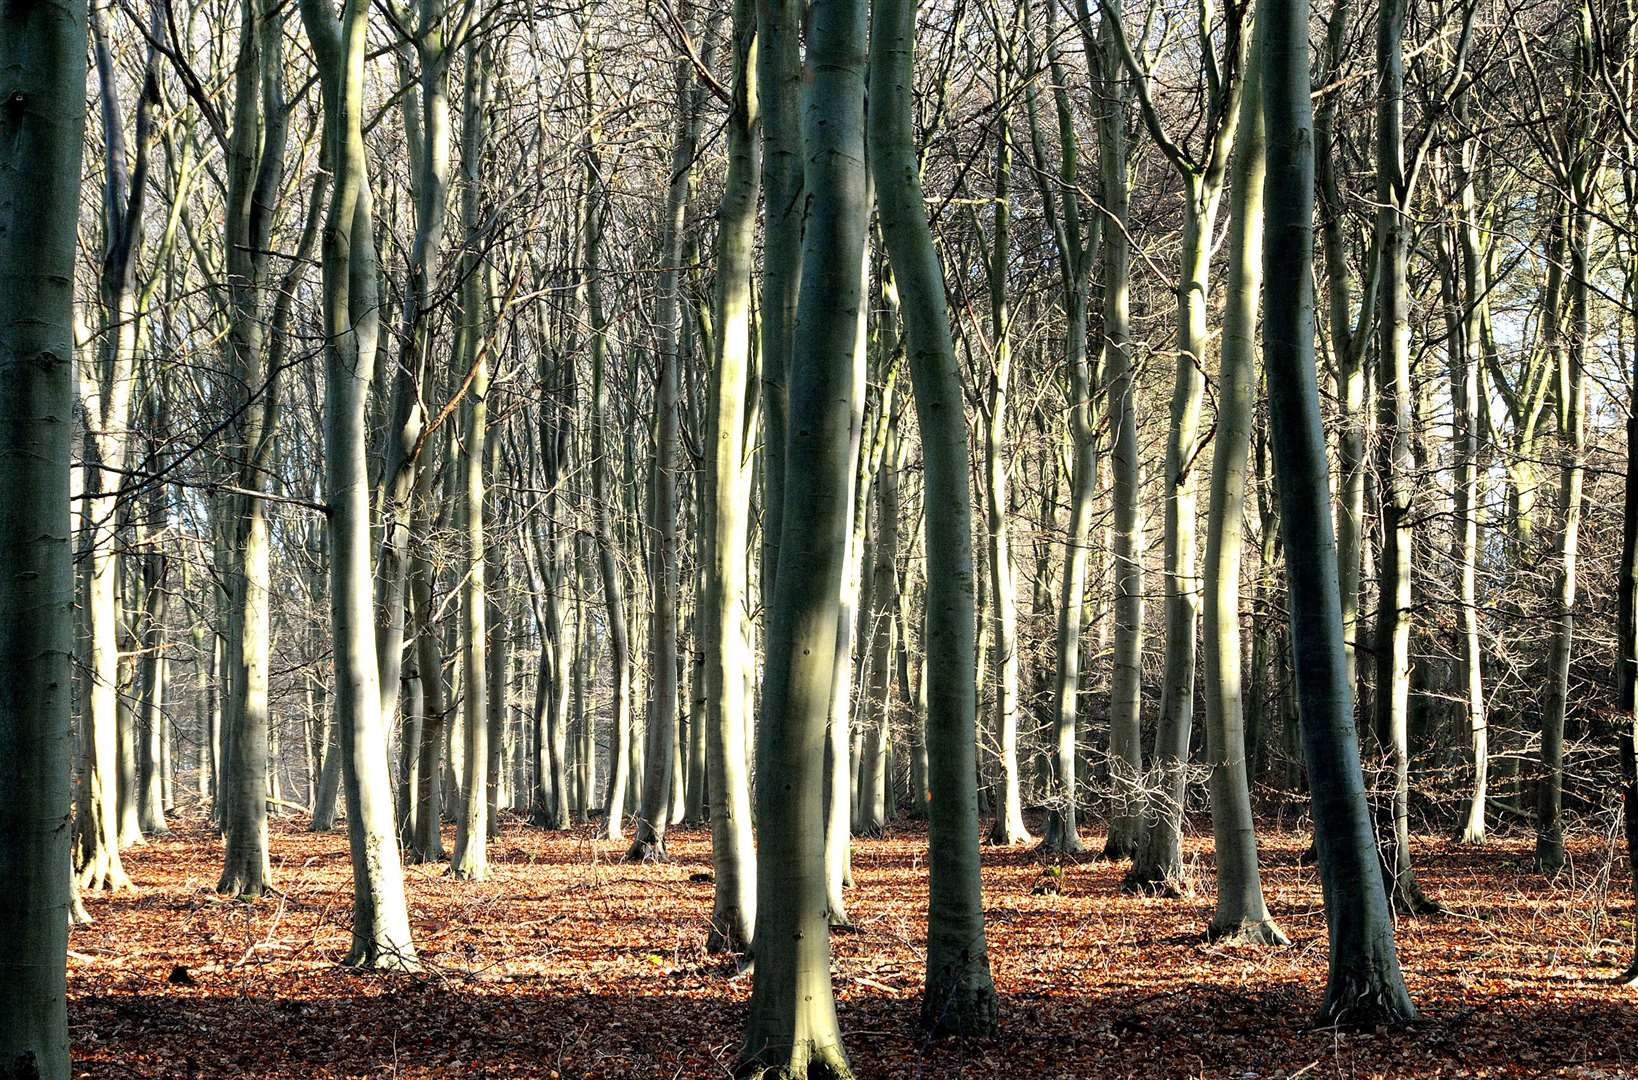 Kent has acres of woodland to get lost in